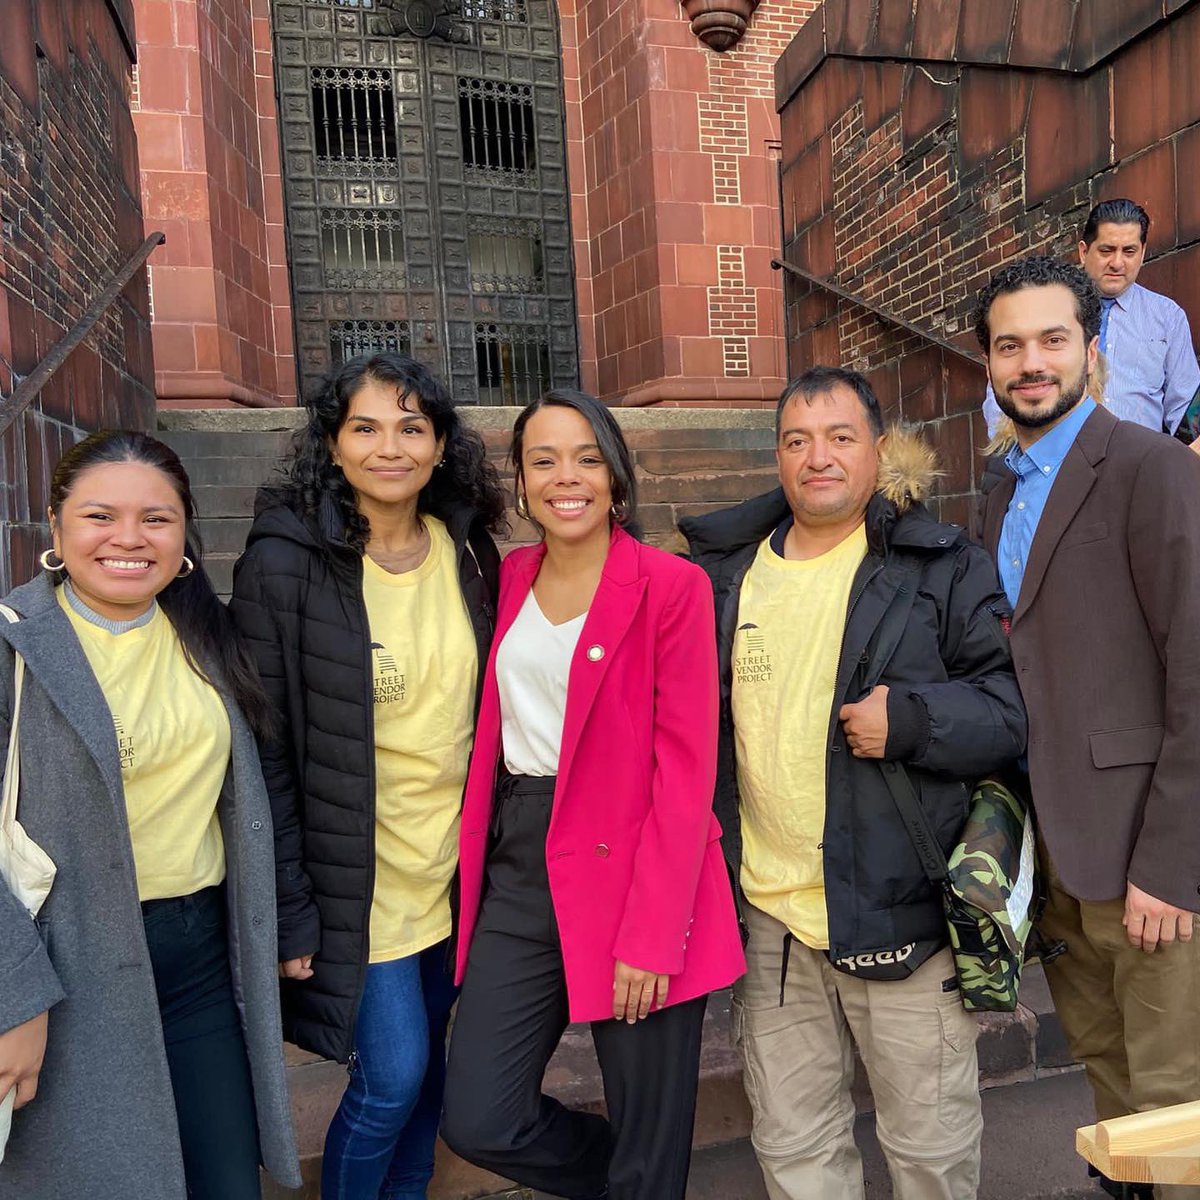 Together for Kingsbridge! We are thrilled to join in coalition with @northwestbronx @PiSanchezNYC , @NYCEDC to kick off the #TogetherForKingsbridge visioning & planning process We’re working with our neighbors to ensure our smallest biz are part of reimagining the Armory